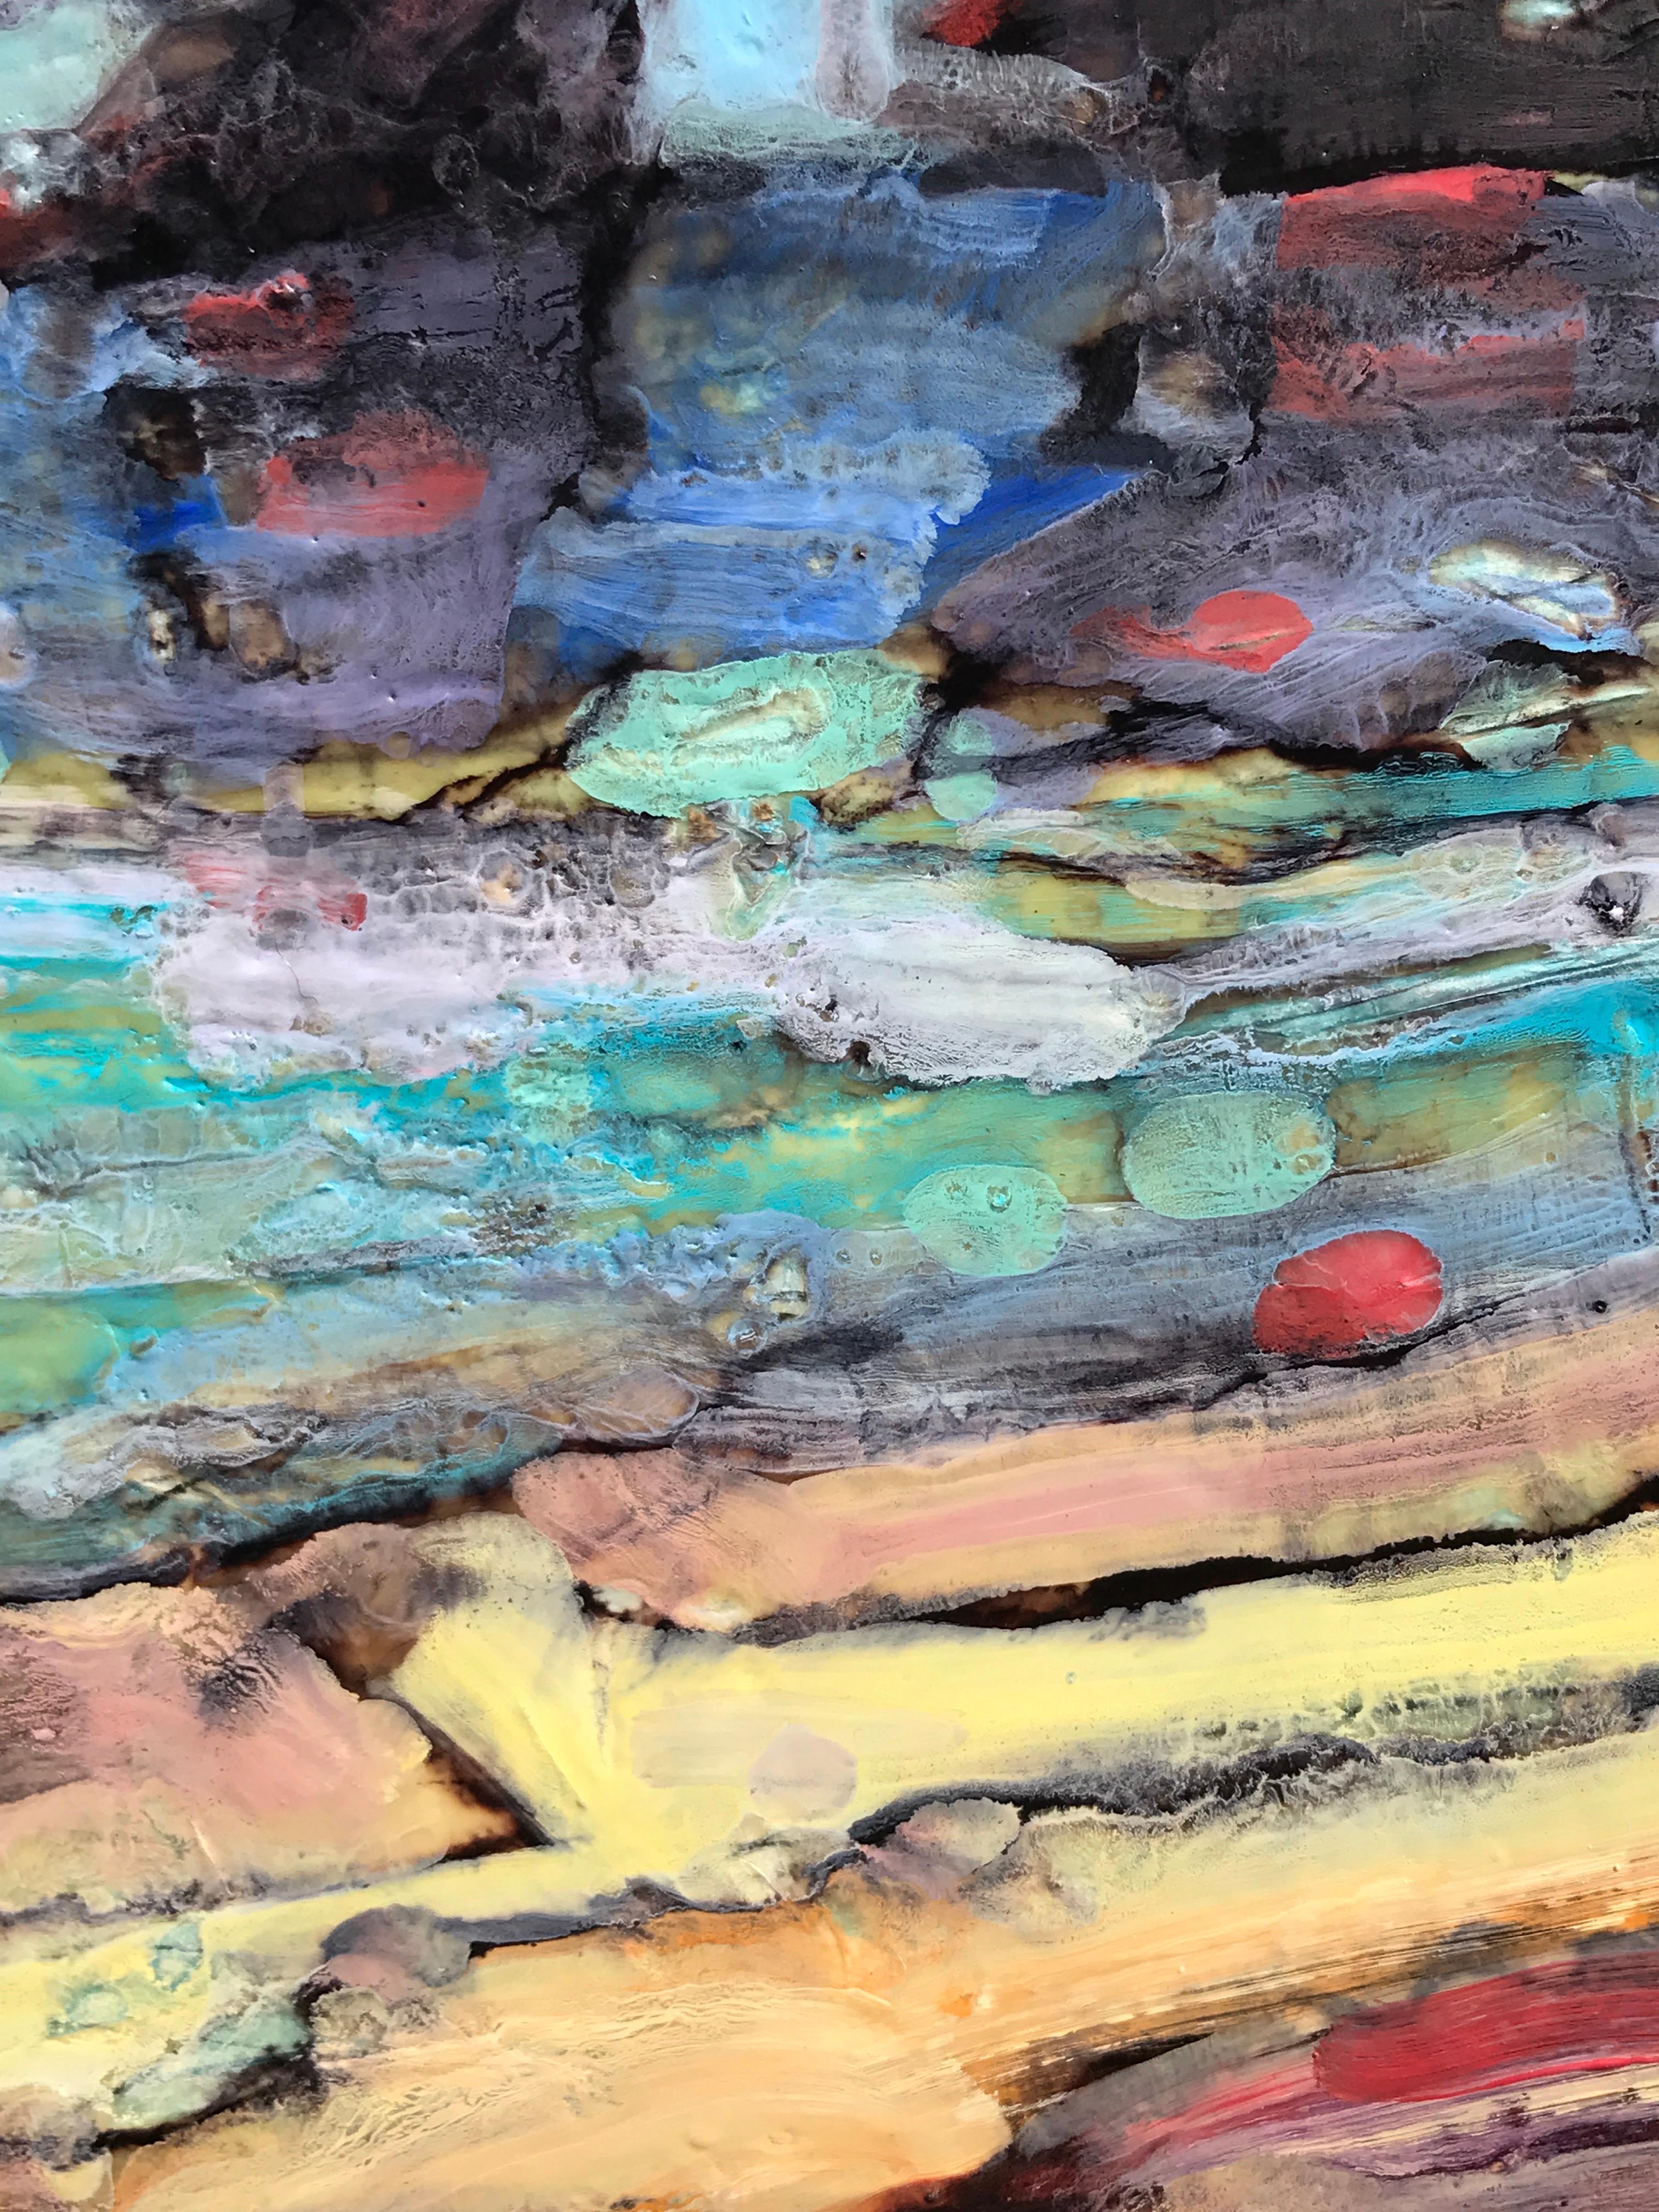 <p>Artist Comments<br />The reflections on the water in the late afternoon inspired this encaustic painting. The intent is for the fractal like detail in the beeswax to convey to the viewer a realistic interpretation.</p><p>About the Artist<br